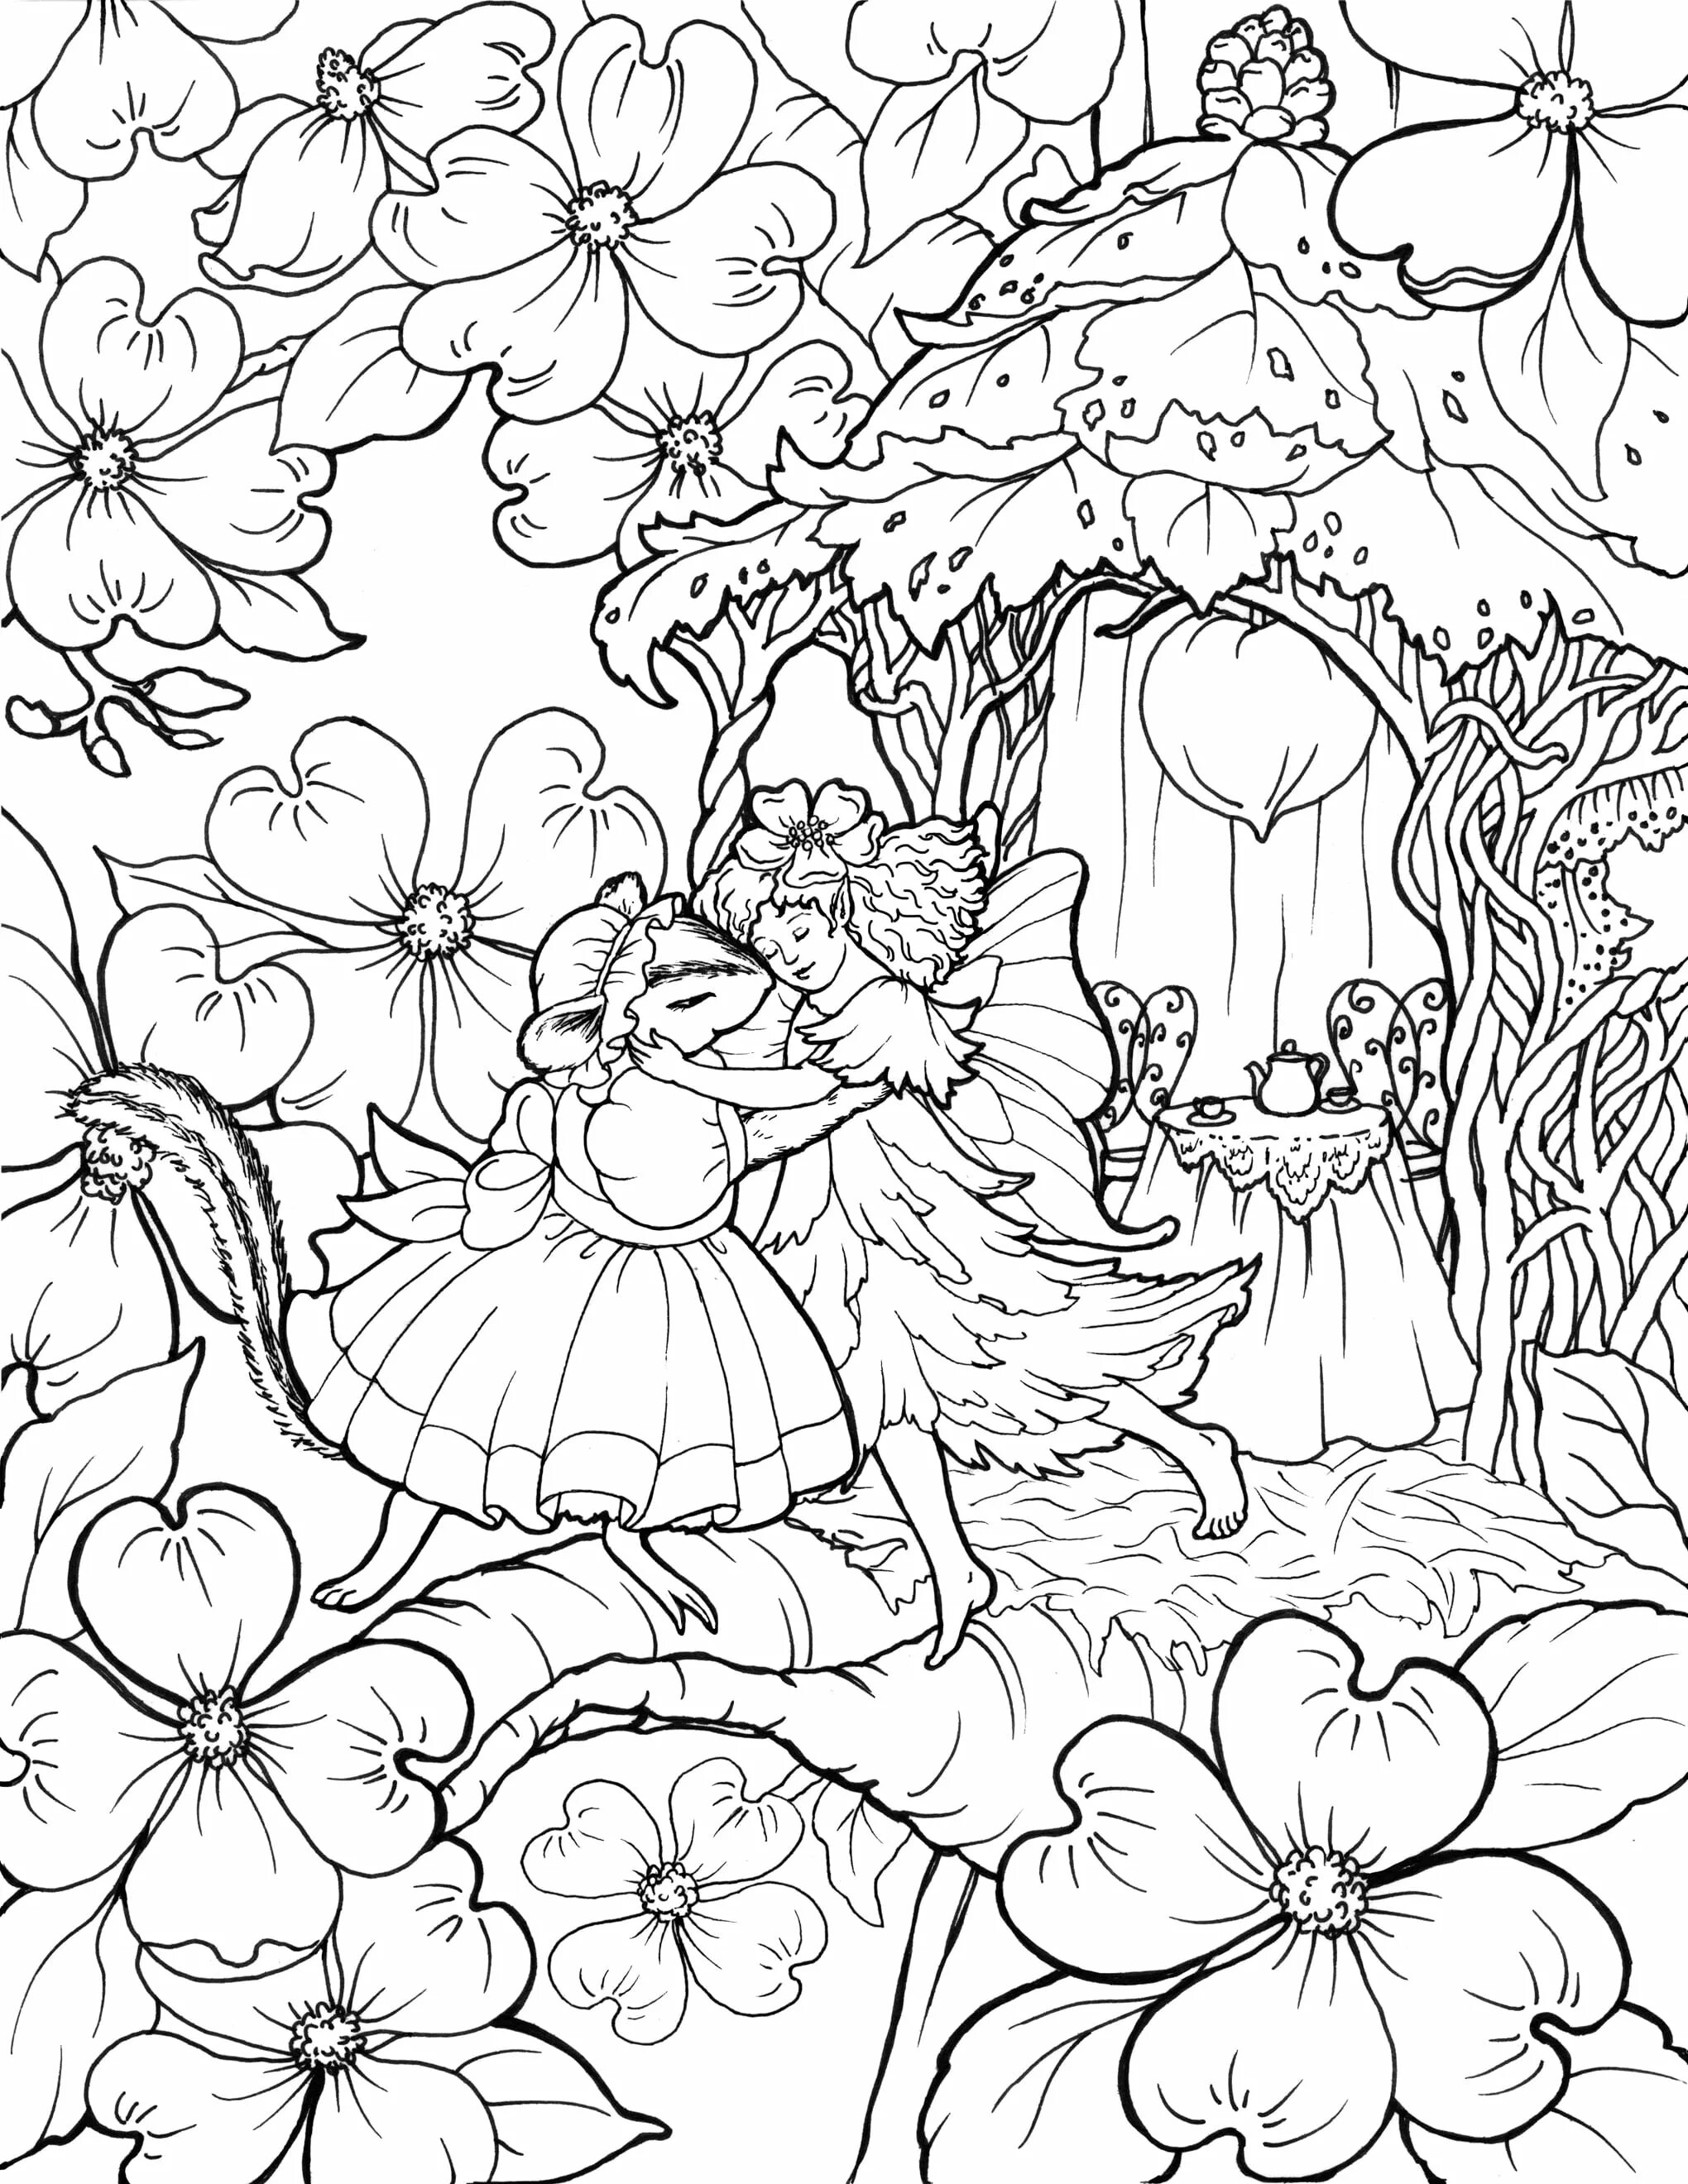 Blissful fairy tale coloring book for girls